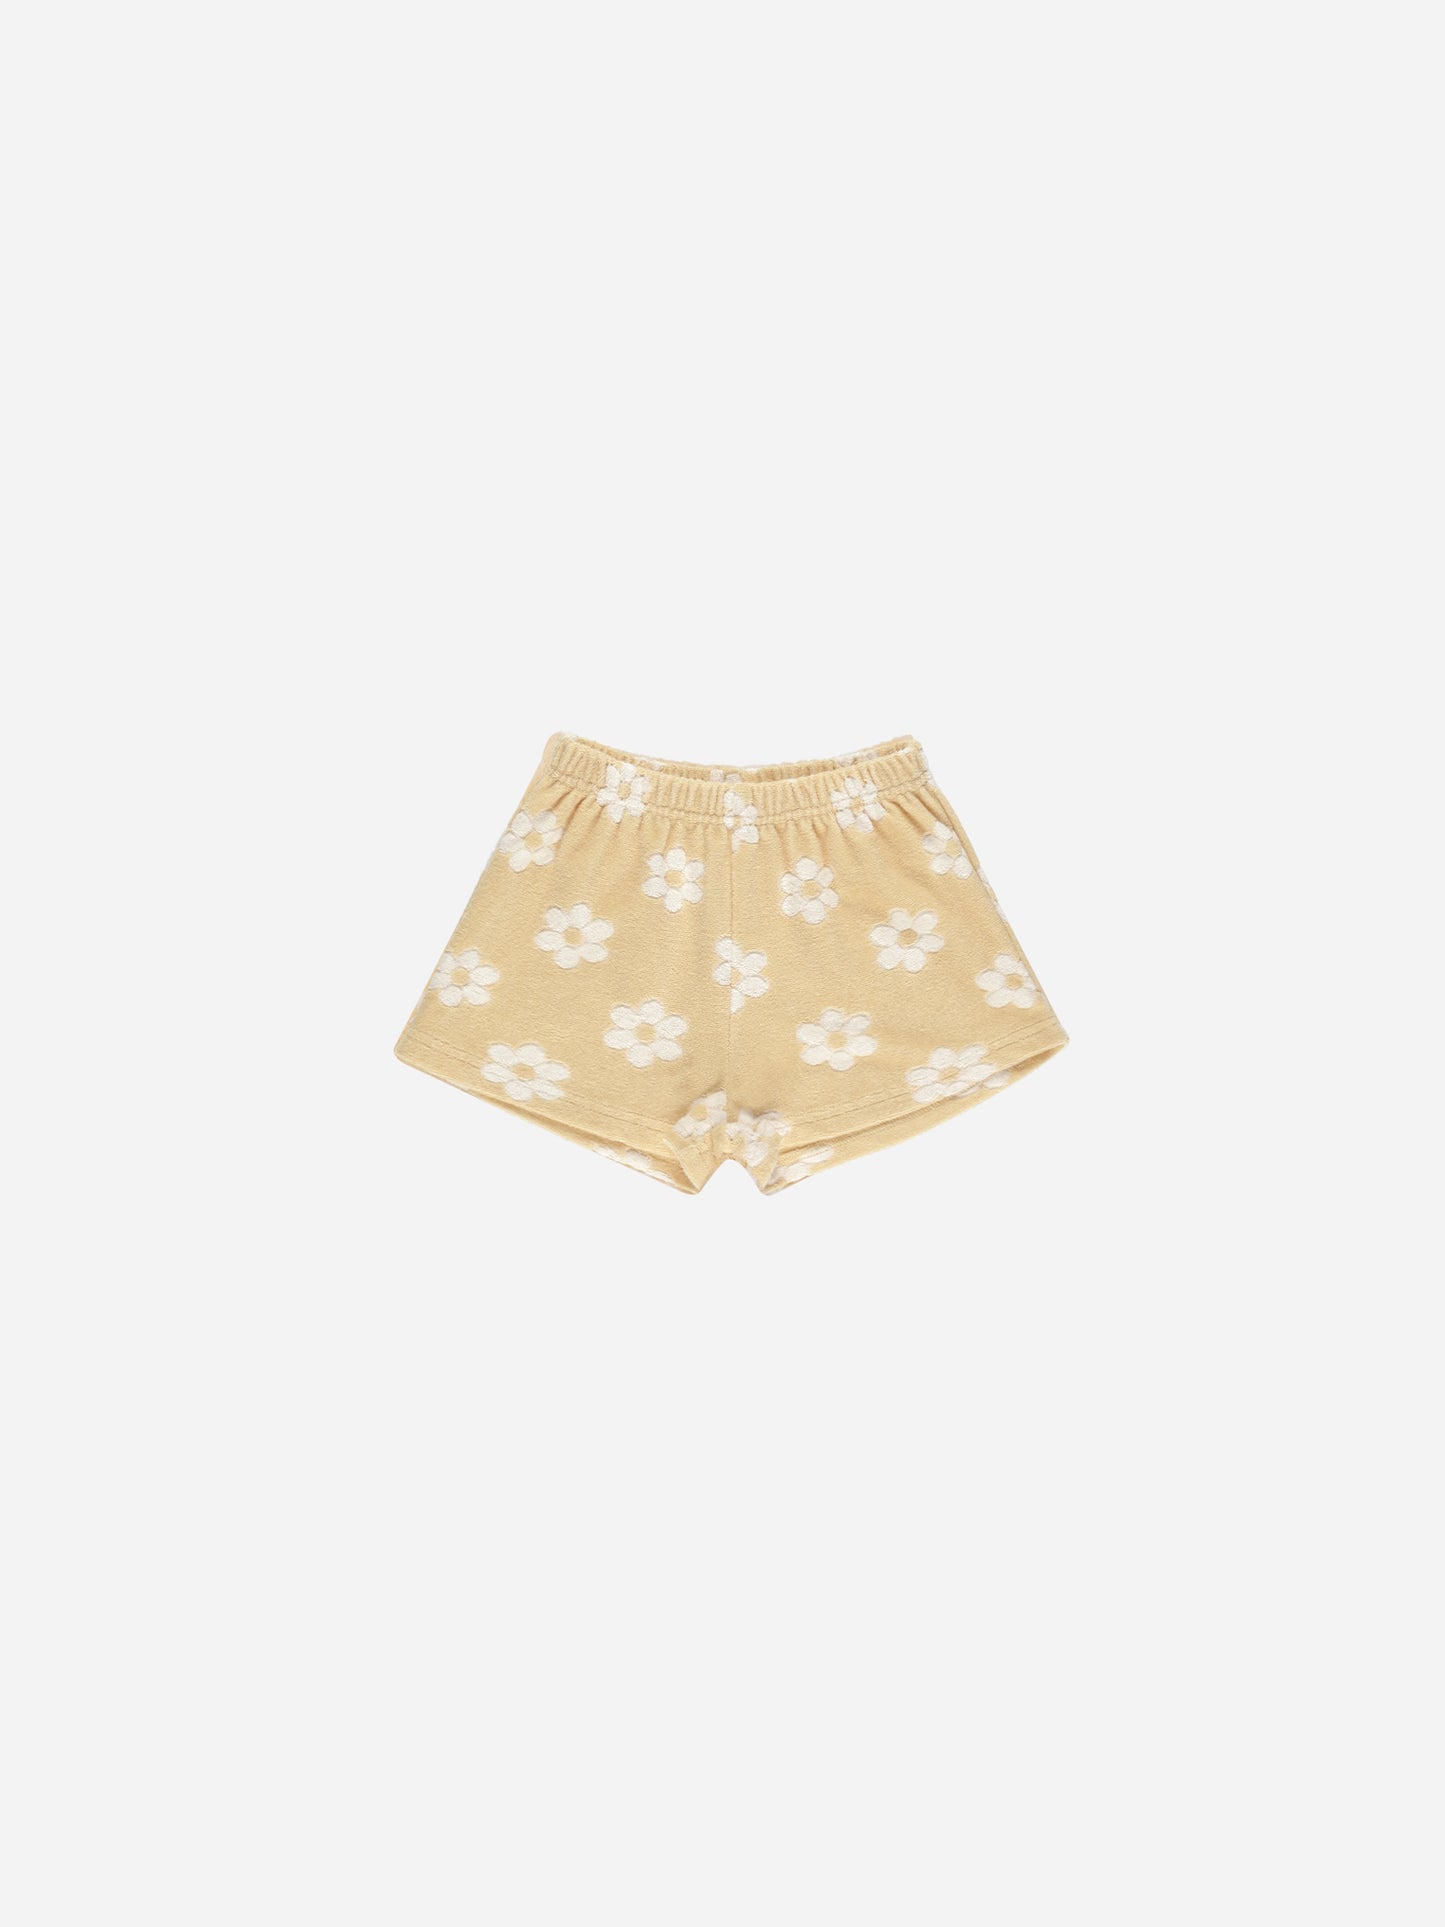 Track Short || Daisy - Rylee + Cru | Kids Clothes | Trendy Baby Clothes | Modern Infant Outfits |